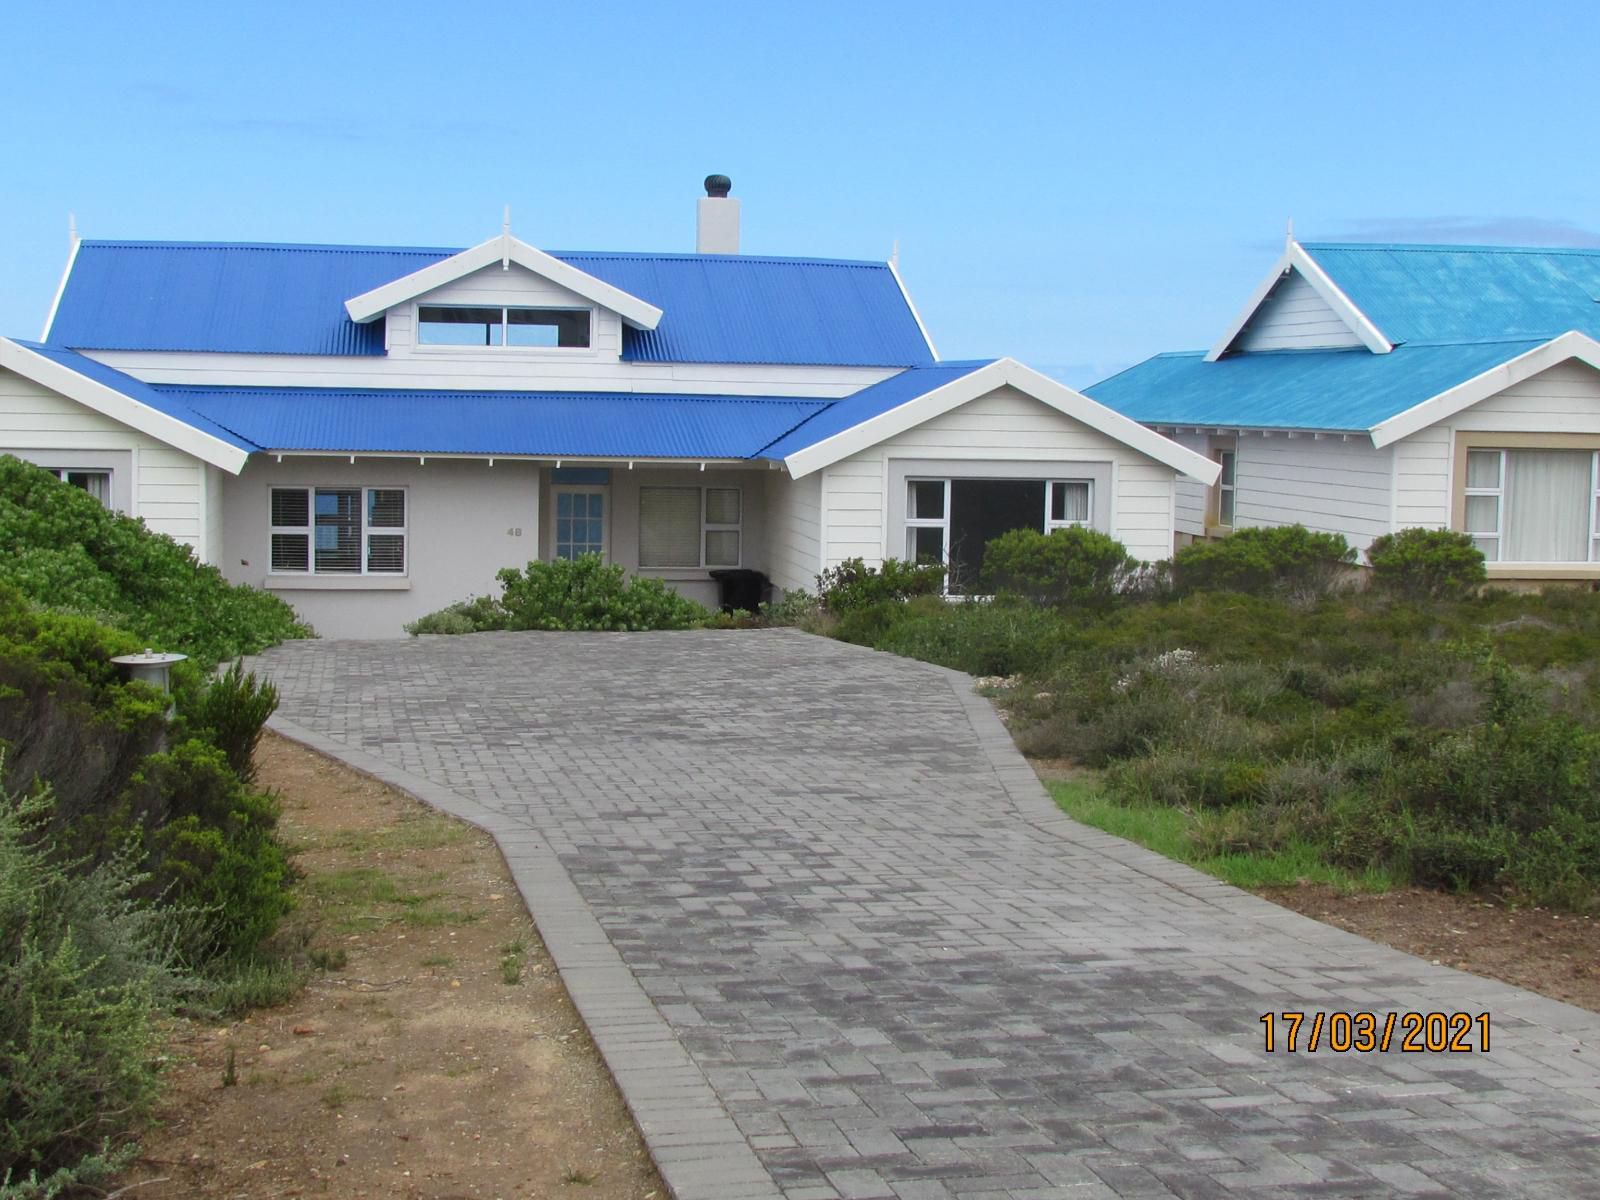 Leisure Rentals Pinnacle Point Golf Estate Pinnacle Point Mossel Bay Western Cape South Africa Building, Architecture, House